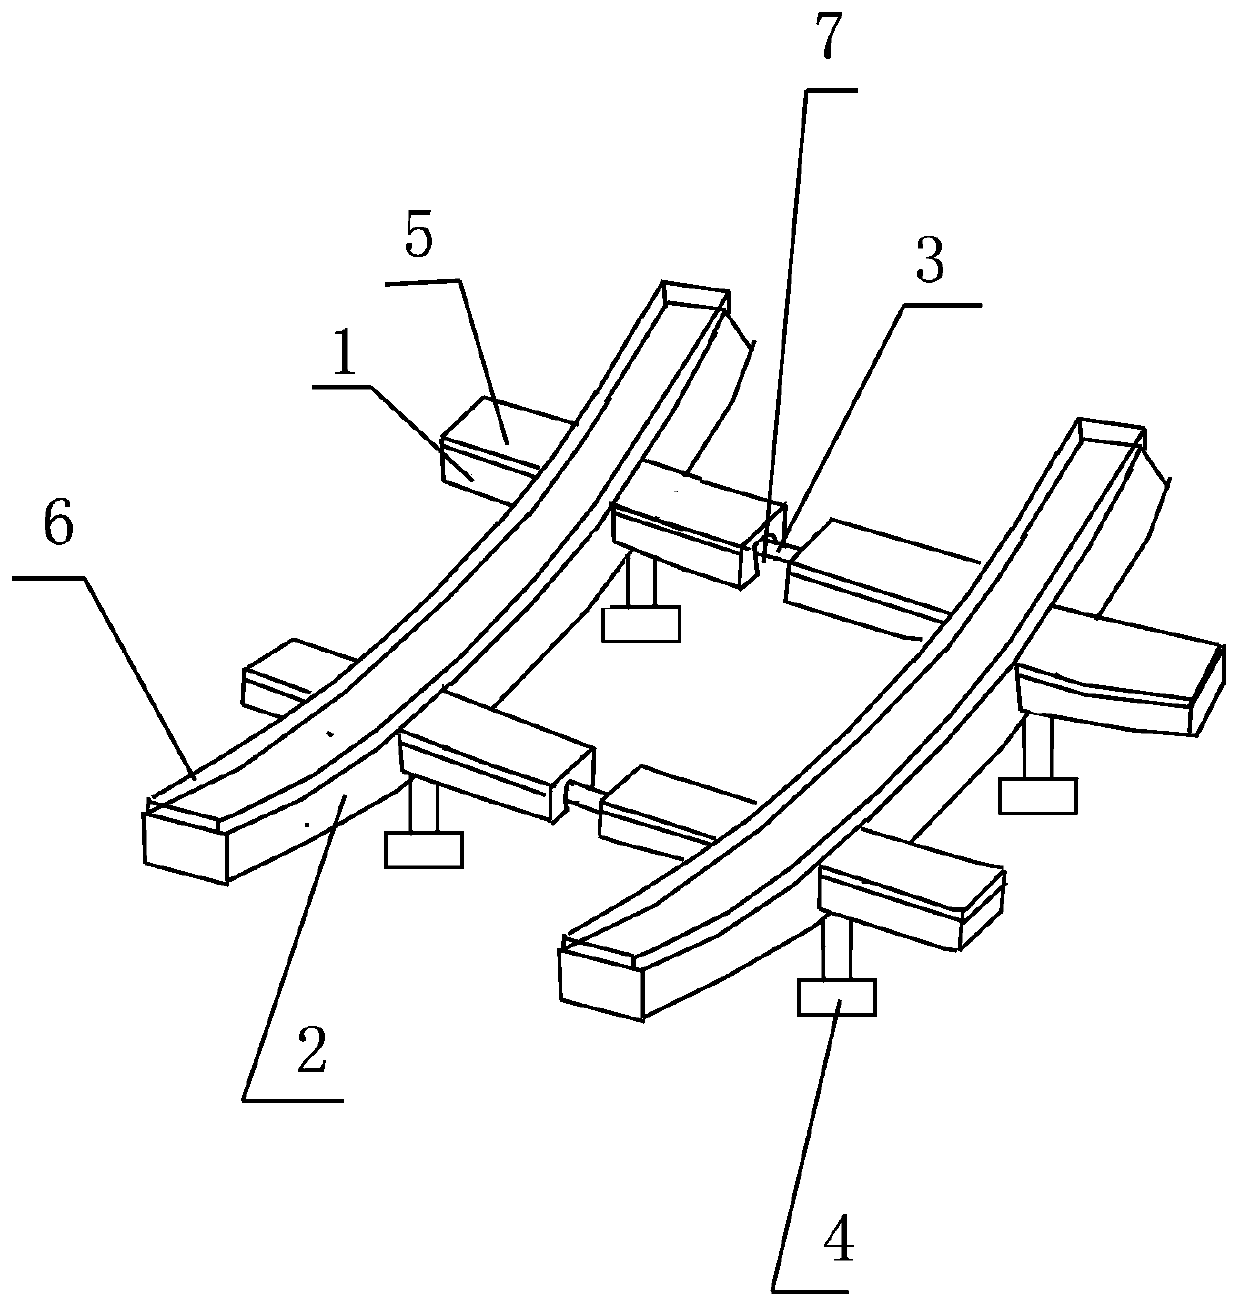 Saddle for placing coiled steel